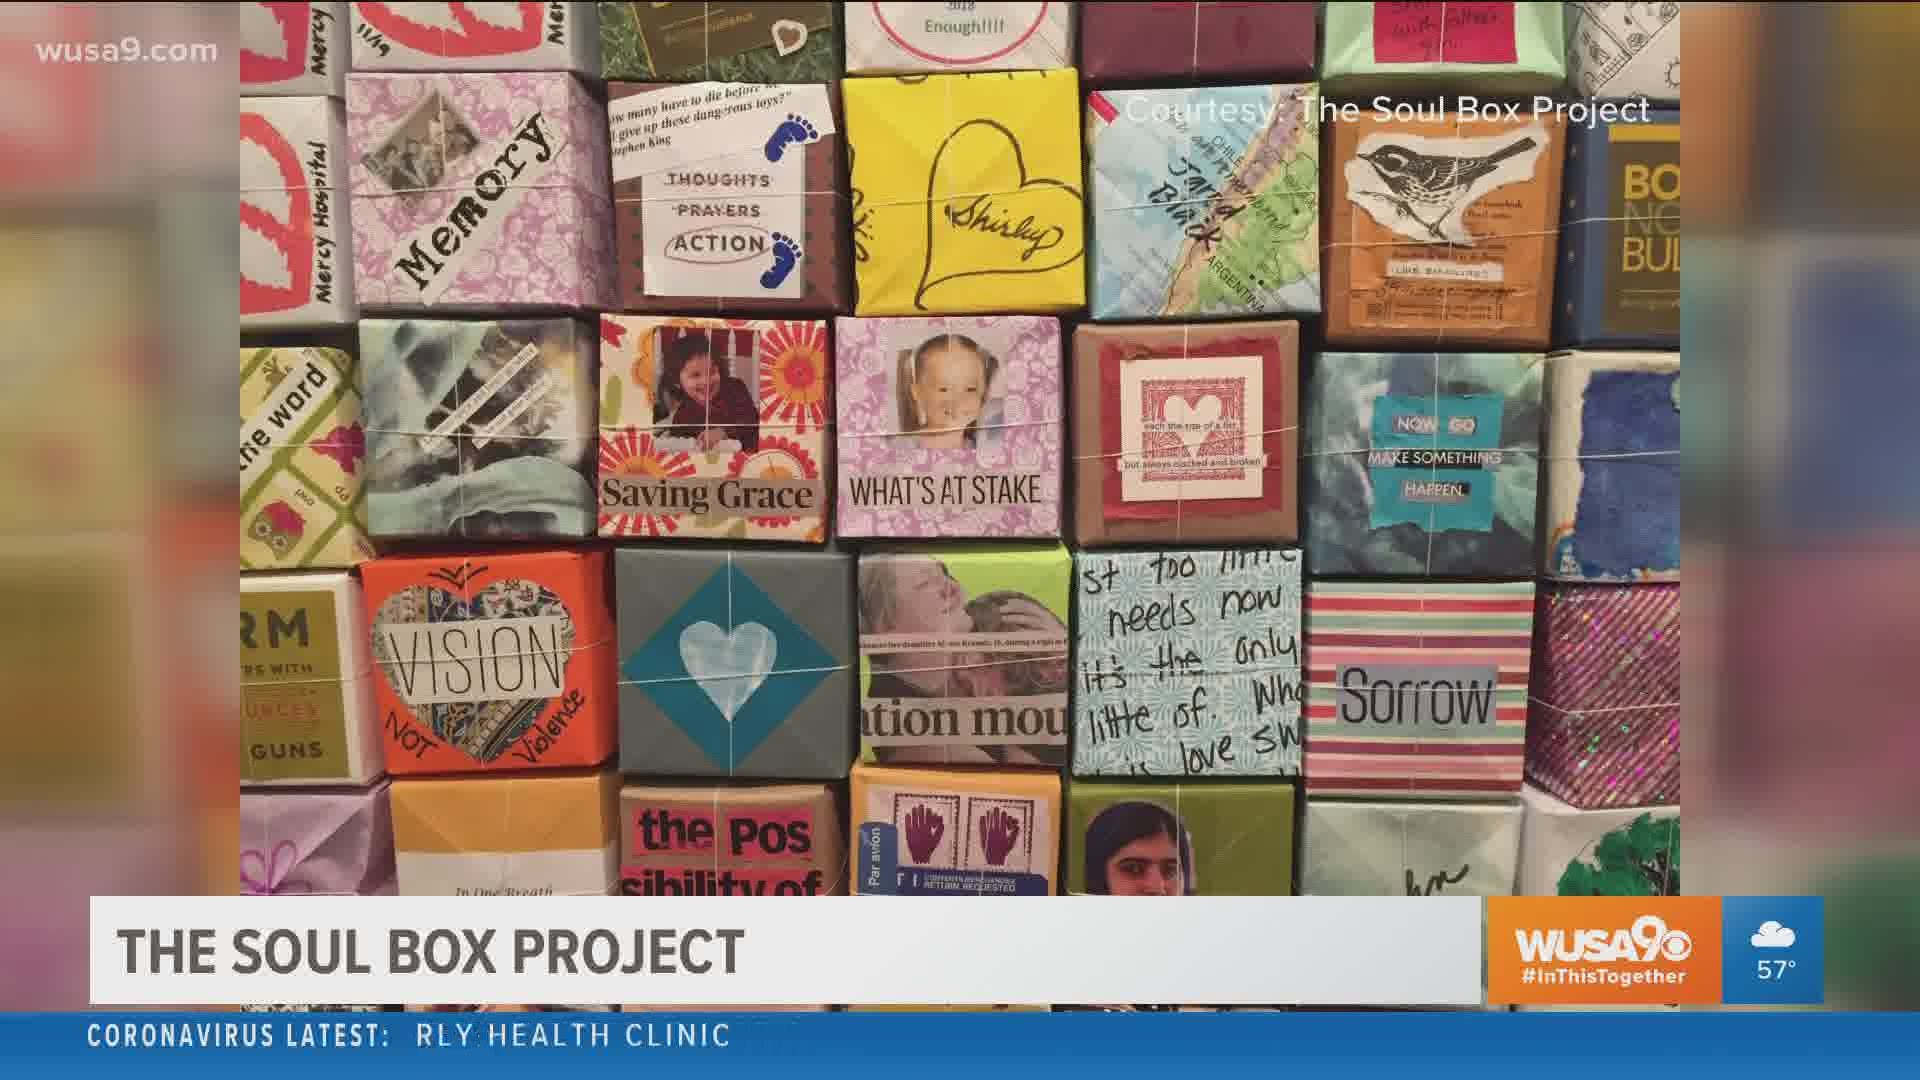 Leslie Lee, founder of the Soul Box Project explains how art can help bring people together. Check out the virtual exhibit at SoulBoxProject.org.